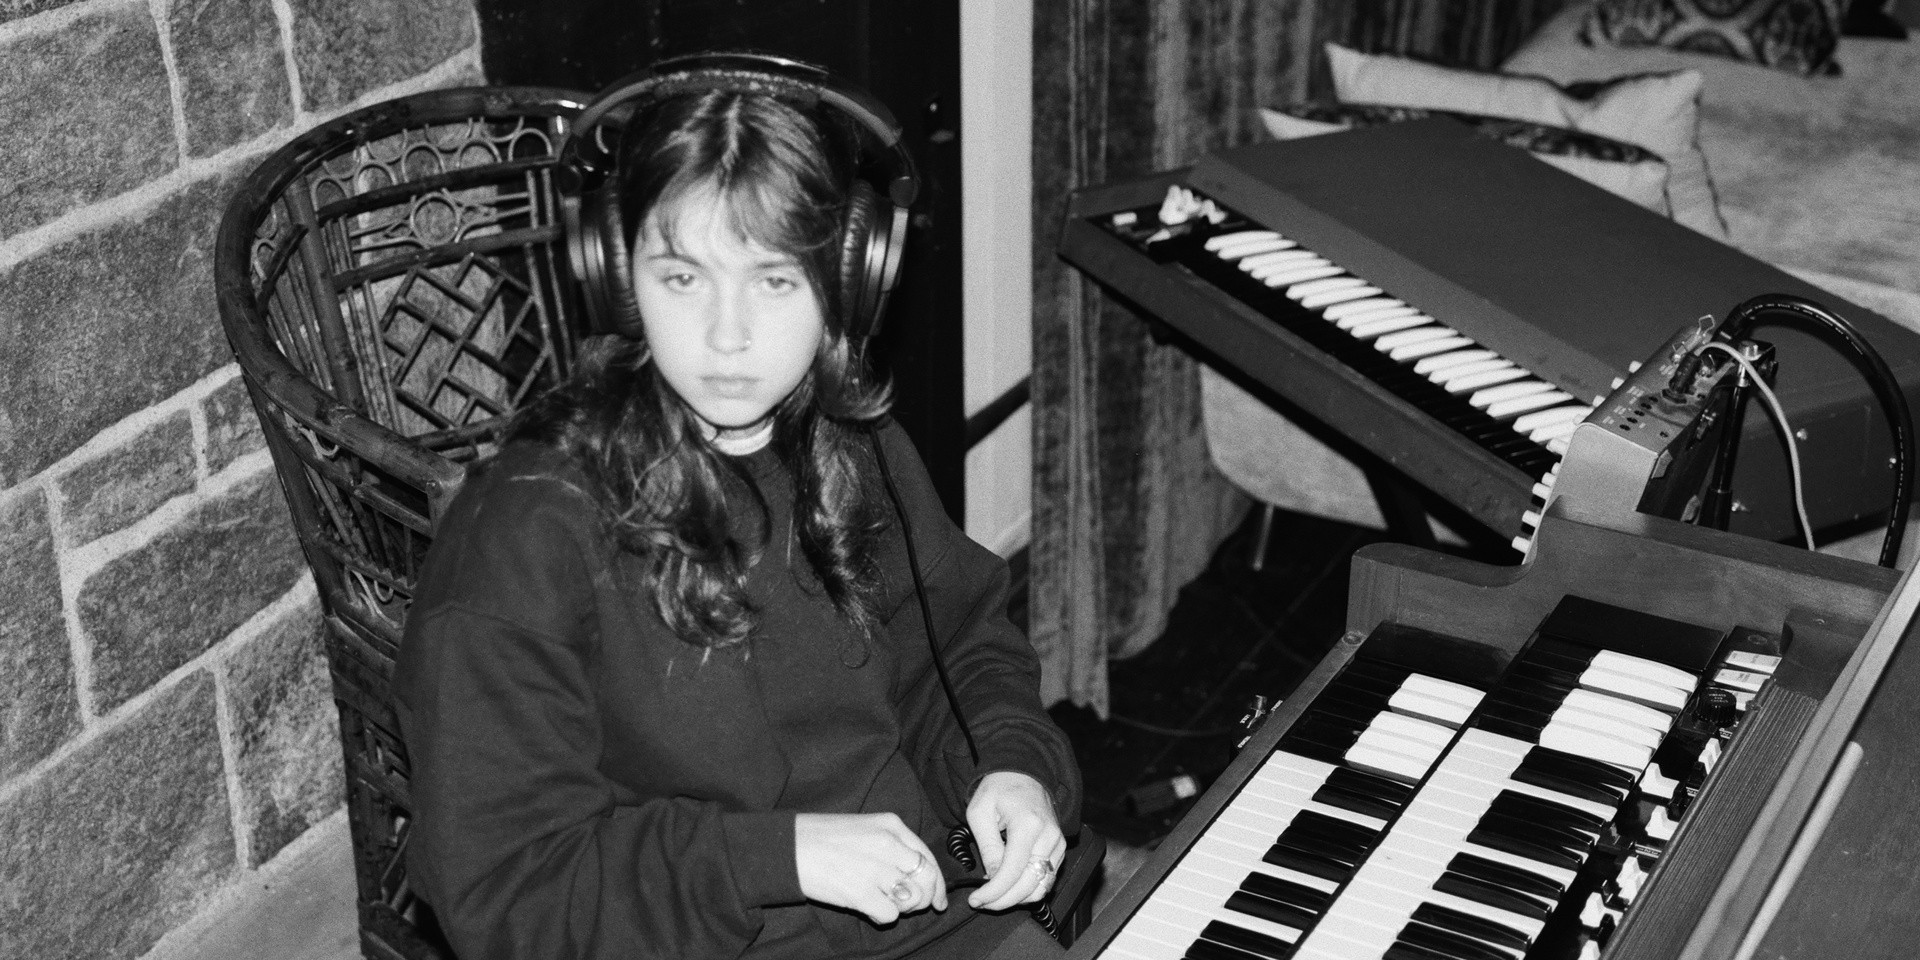 Clairo returns with sophomore album ‘Sling,' co-produced with Jack Antonoff - listen